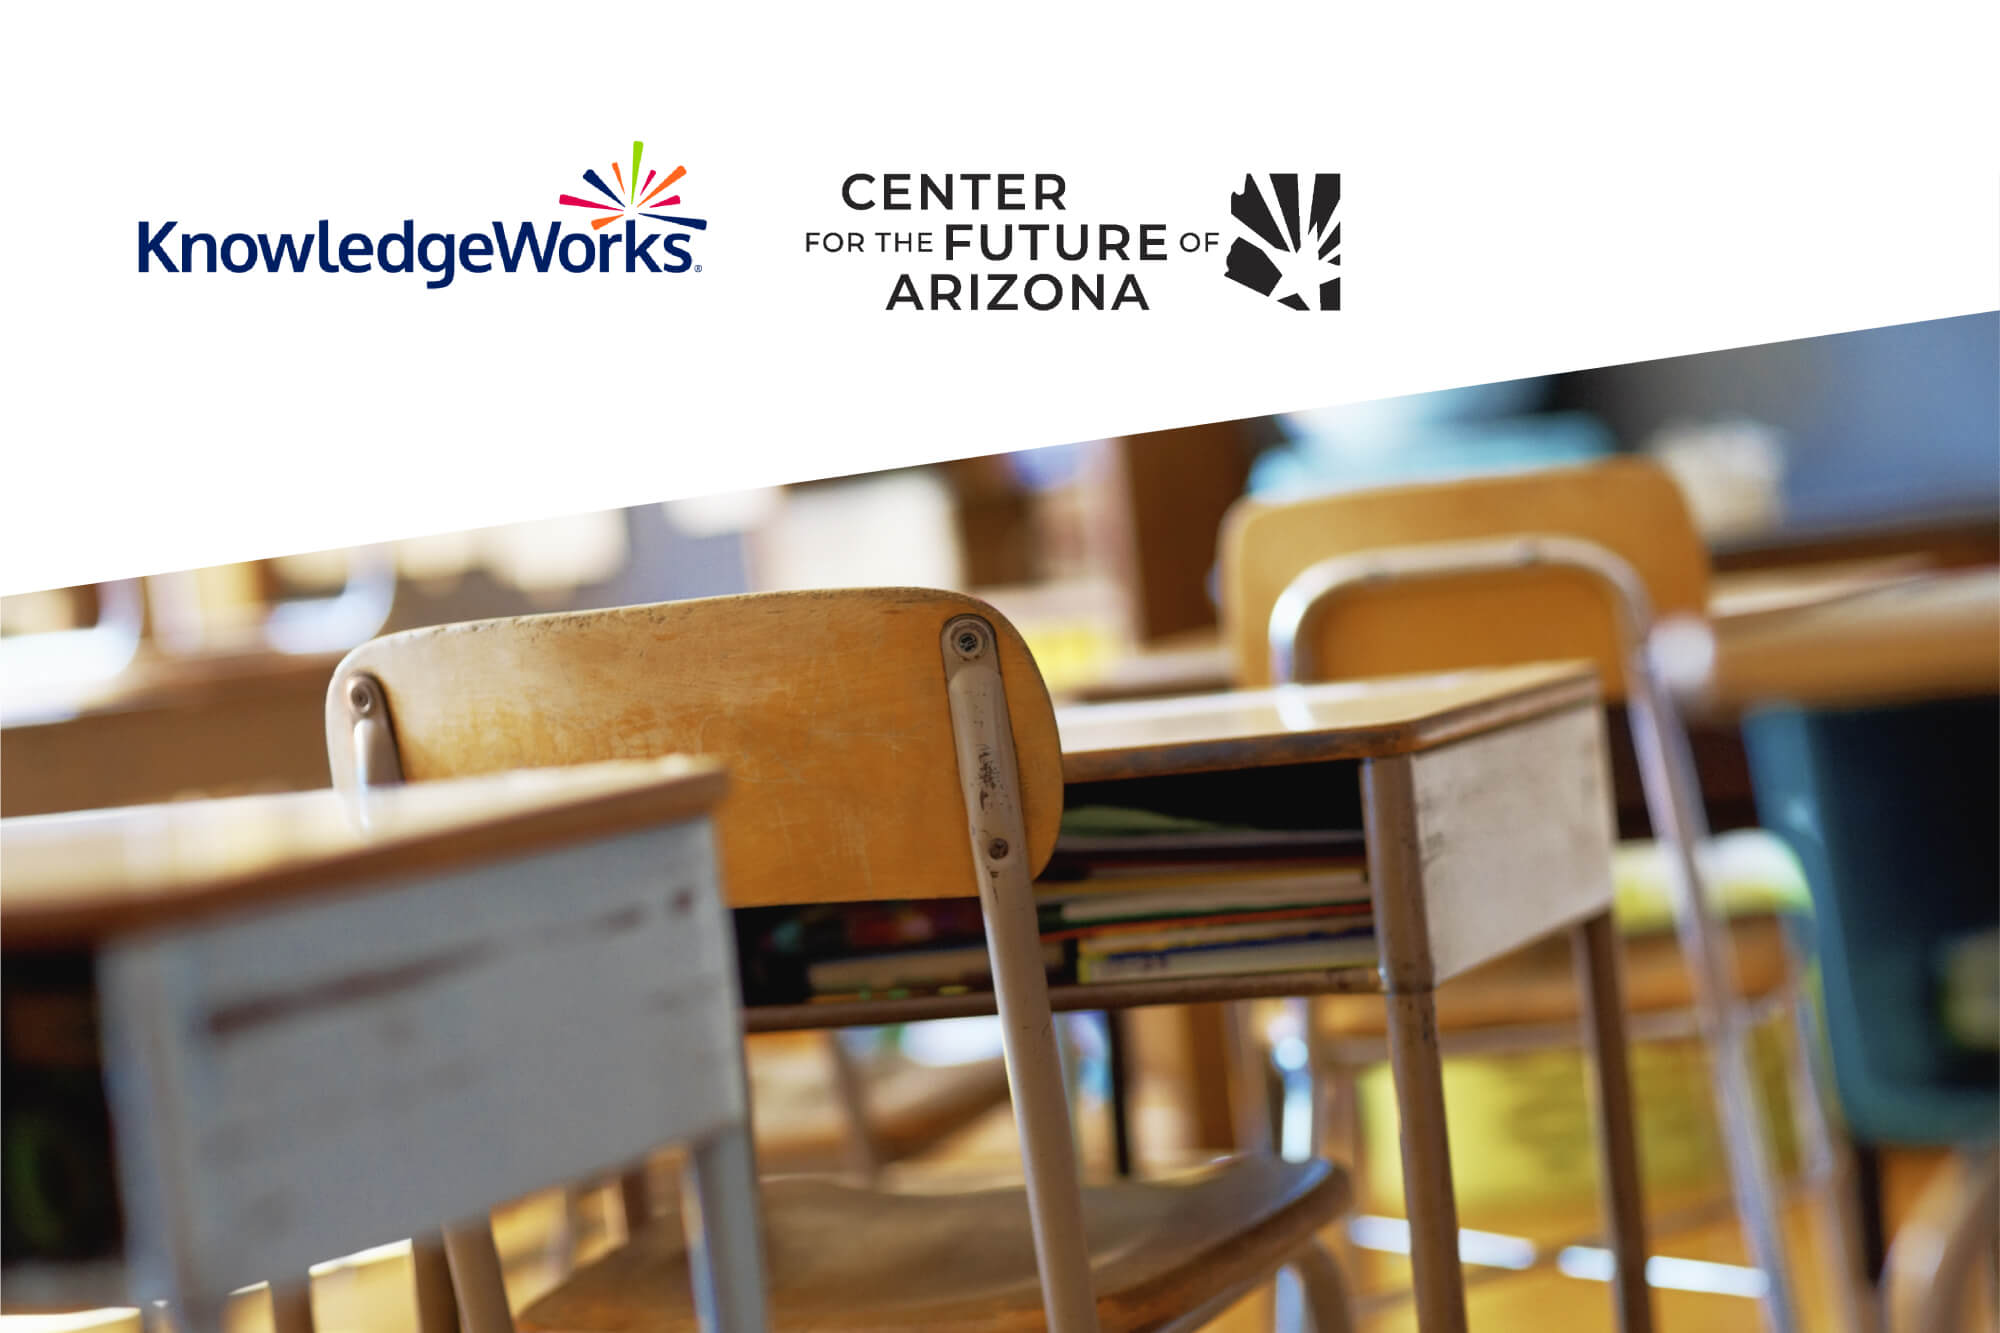 Classroom with KnowledgeWorks and Center for the Future of Arizona logos